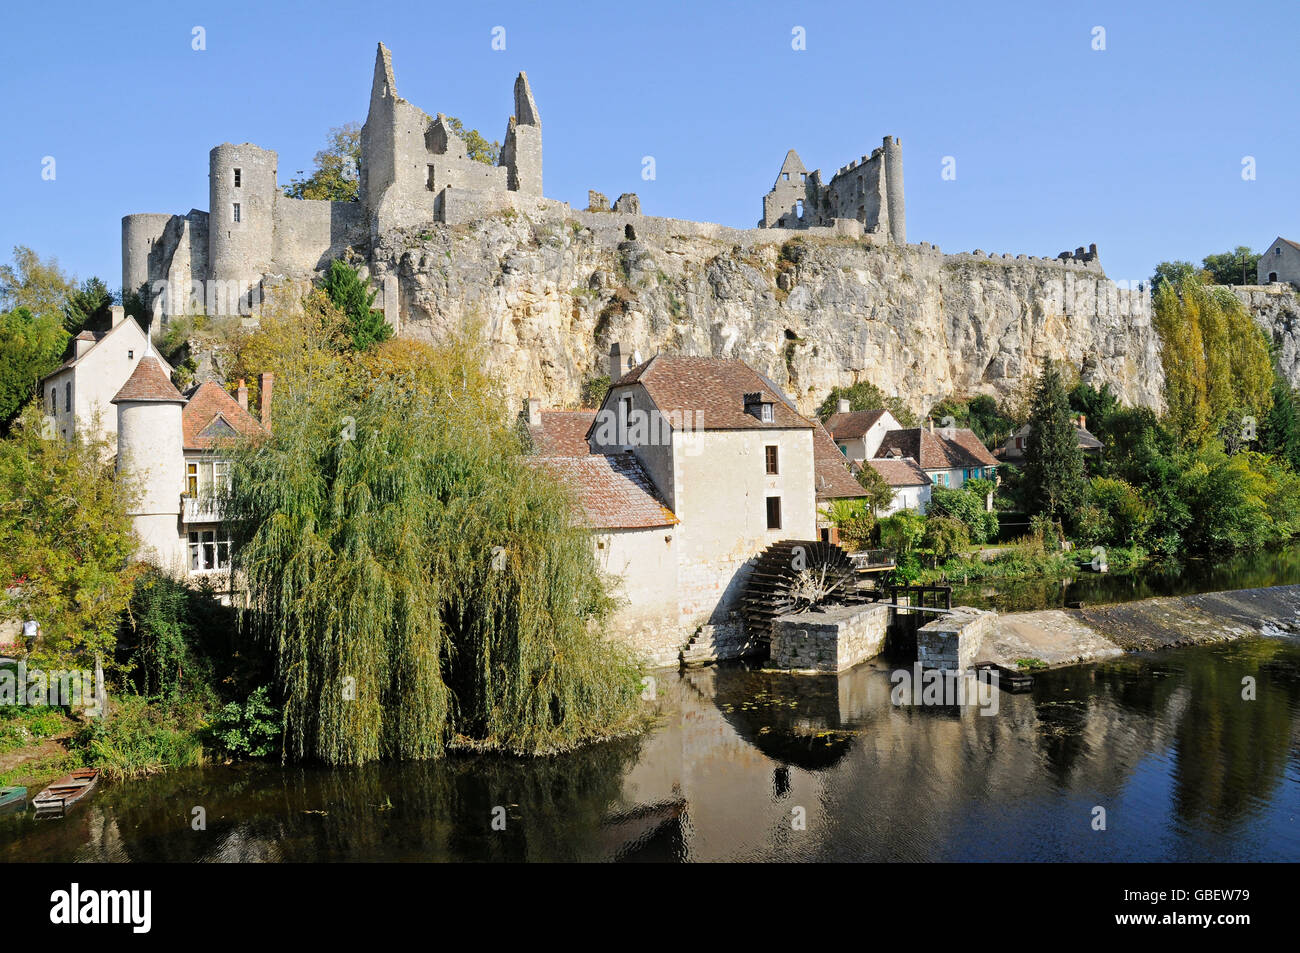 Castle rock and water mill, Anglin river, Angles sur l'Anglin, Poitiers, Vienne, Poitou-Charentes, France Stock Photo